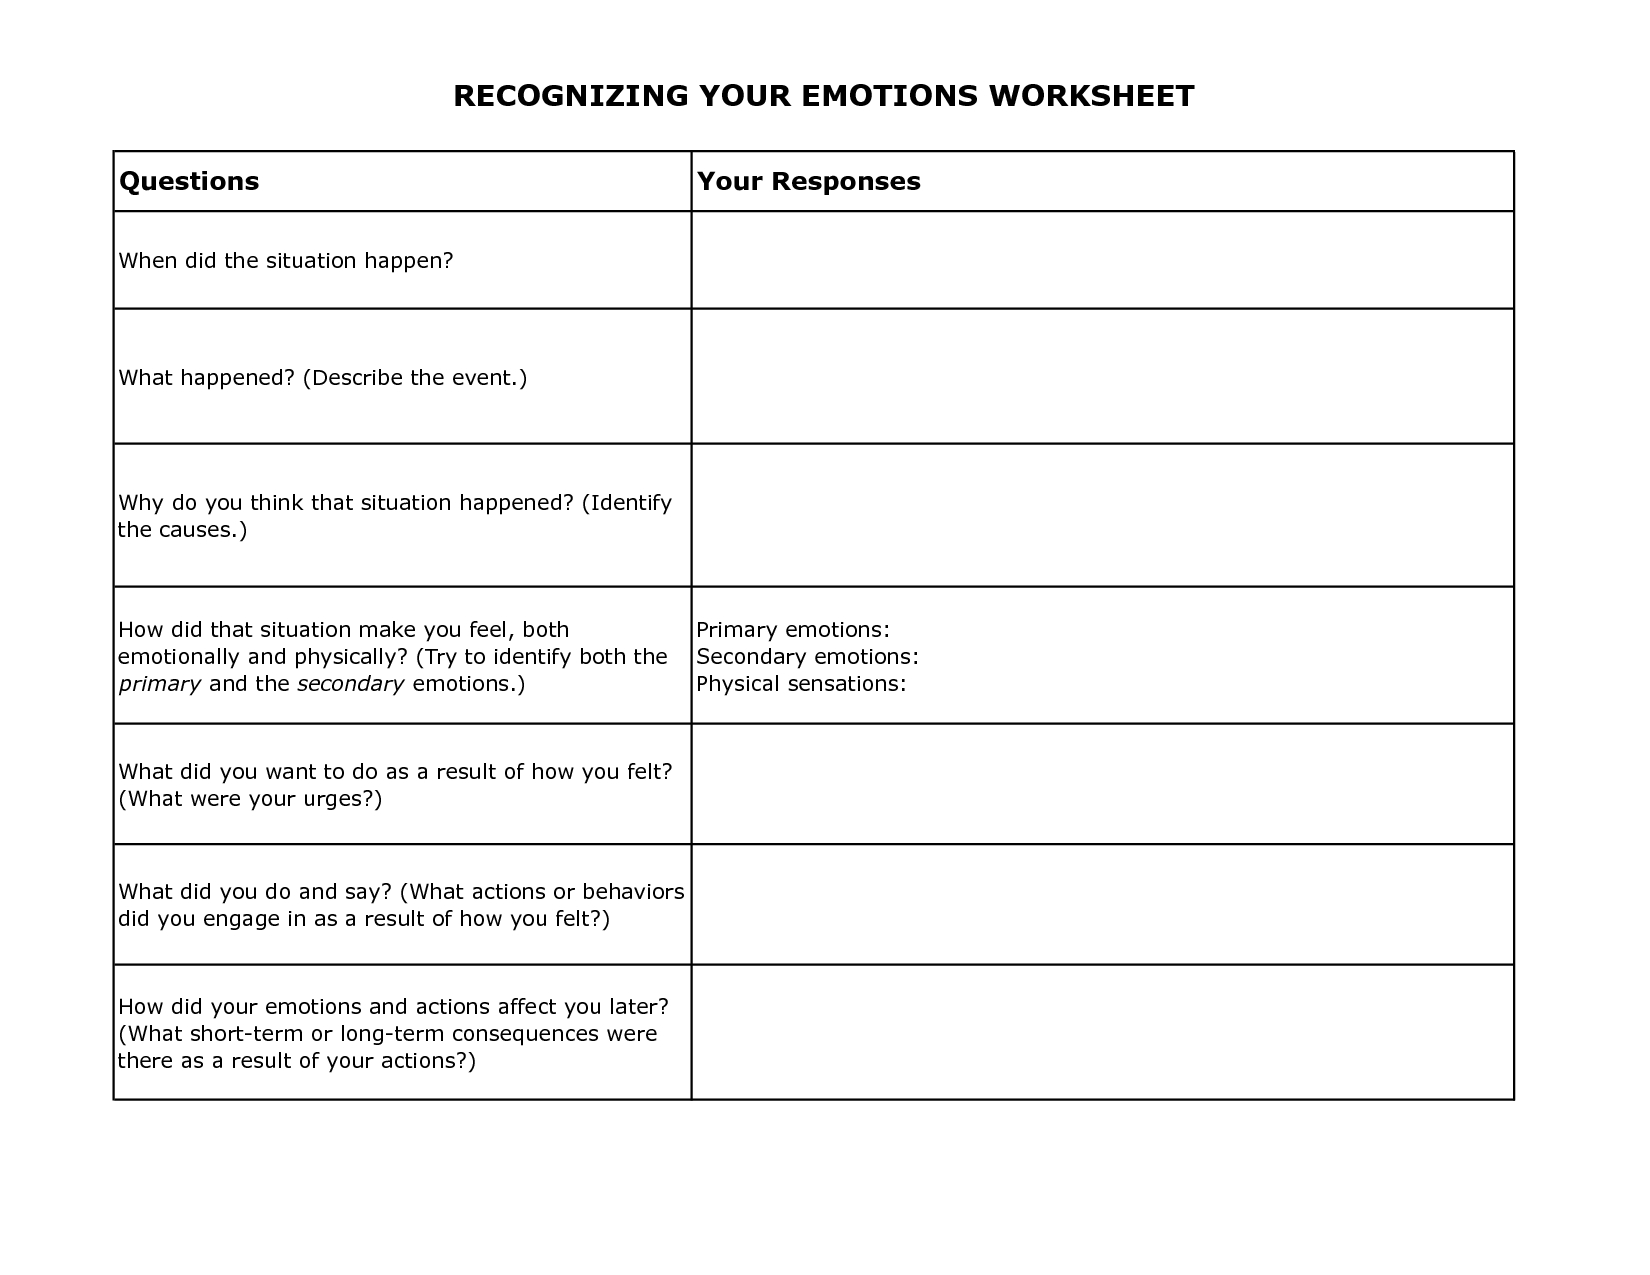 Free Printable Dbt Worksheets | Recognizing Your Emotions Worksheet - Free Printable Therapy Worksheets